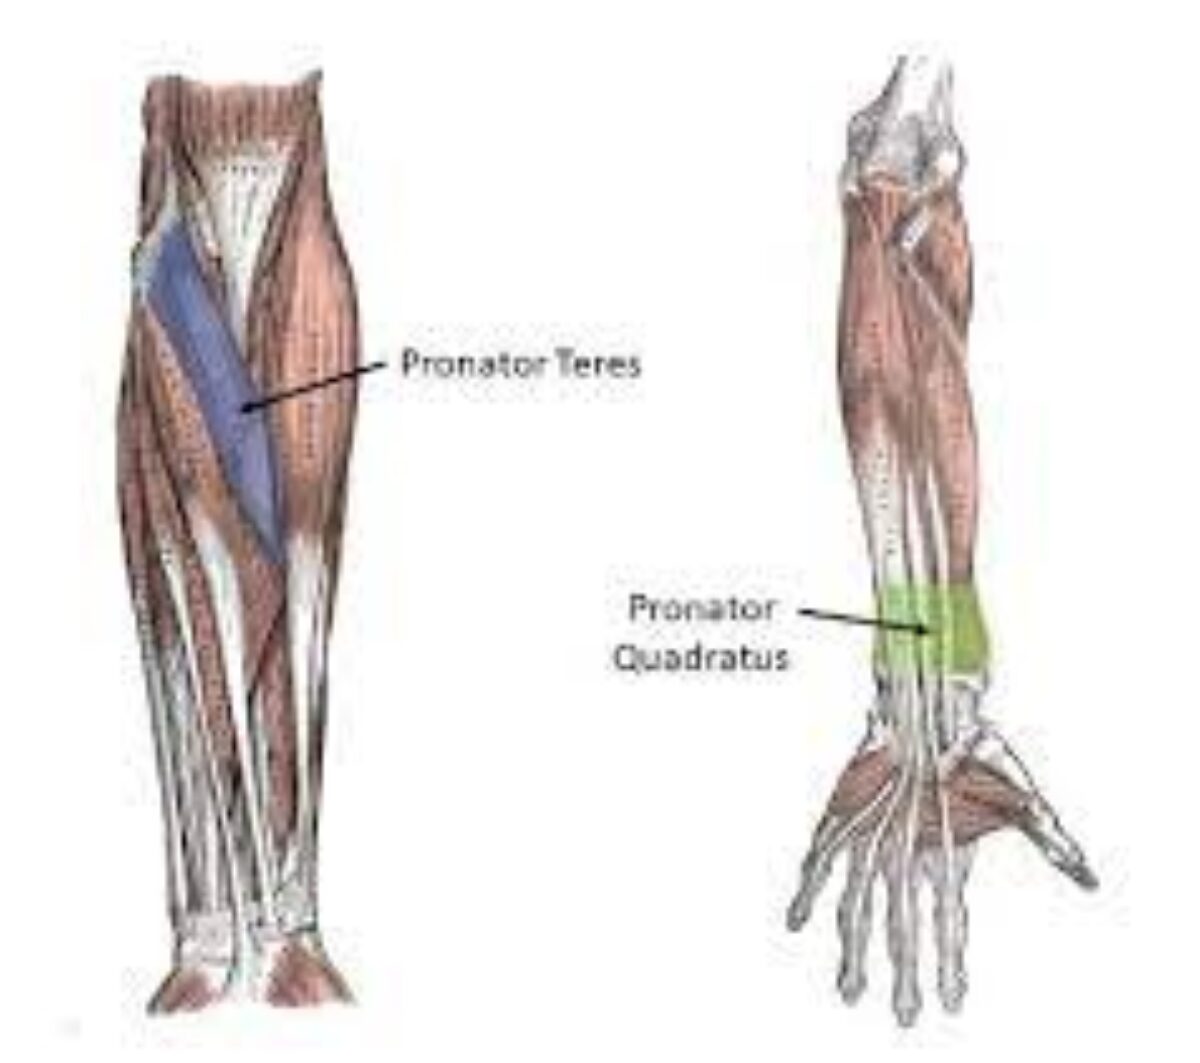 Strengthen Your Pronator Teres Muscles with These Exercises